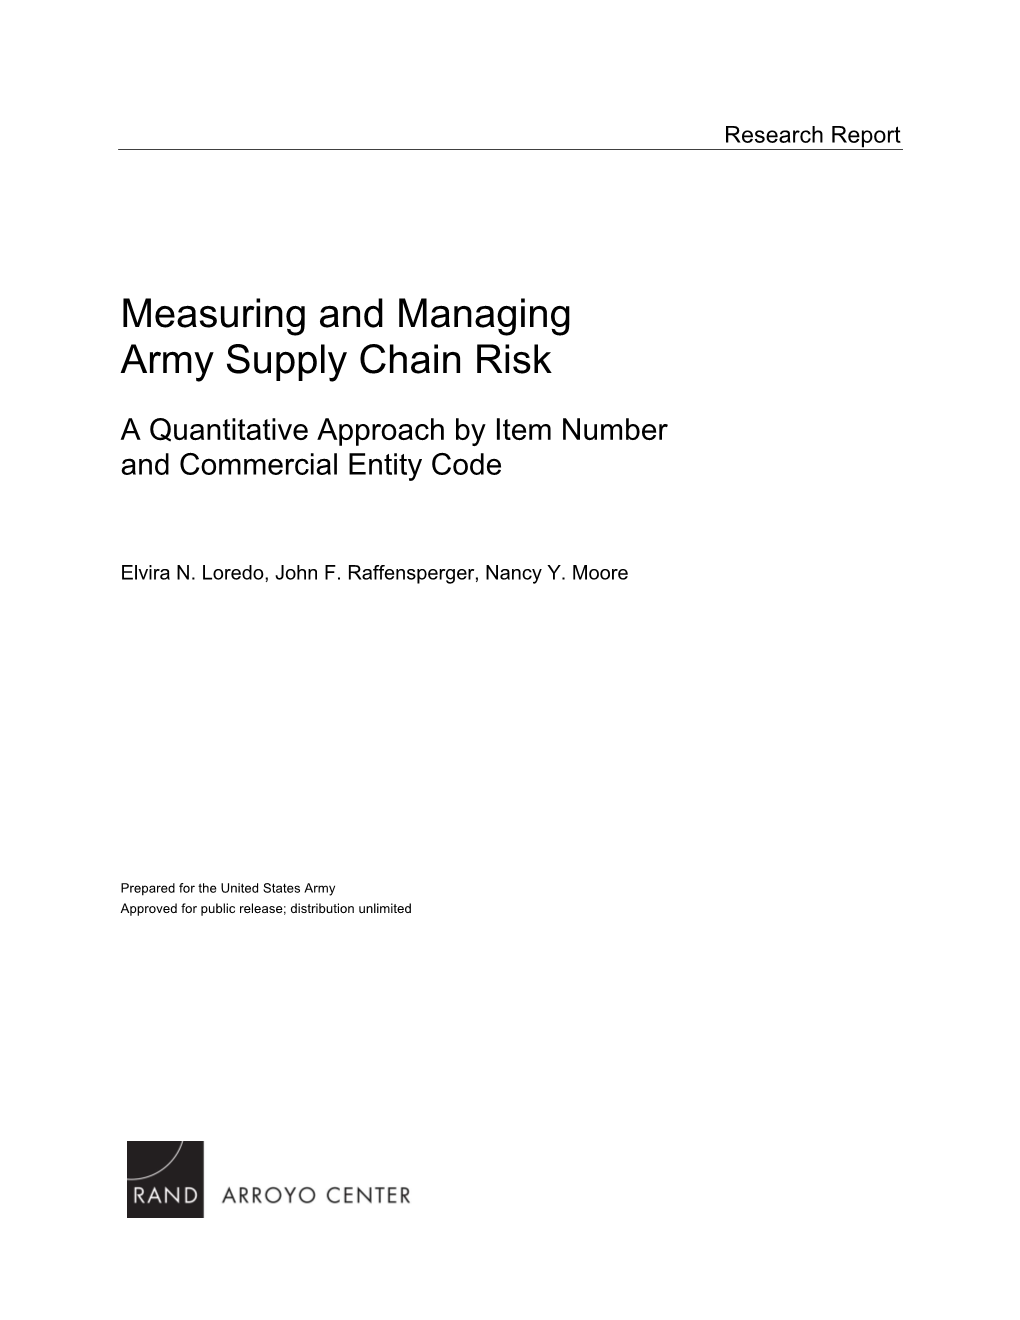 Measuring and Managing Army Supply Chain Risk